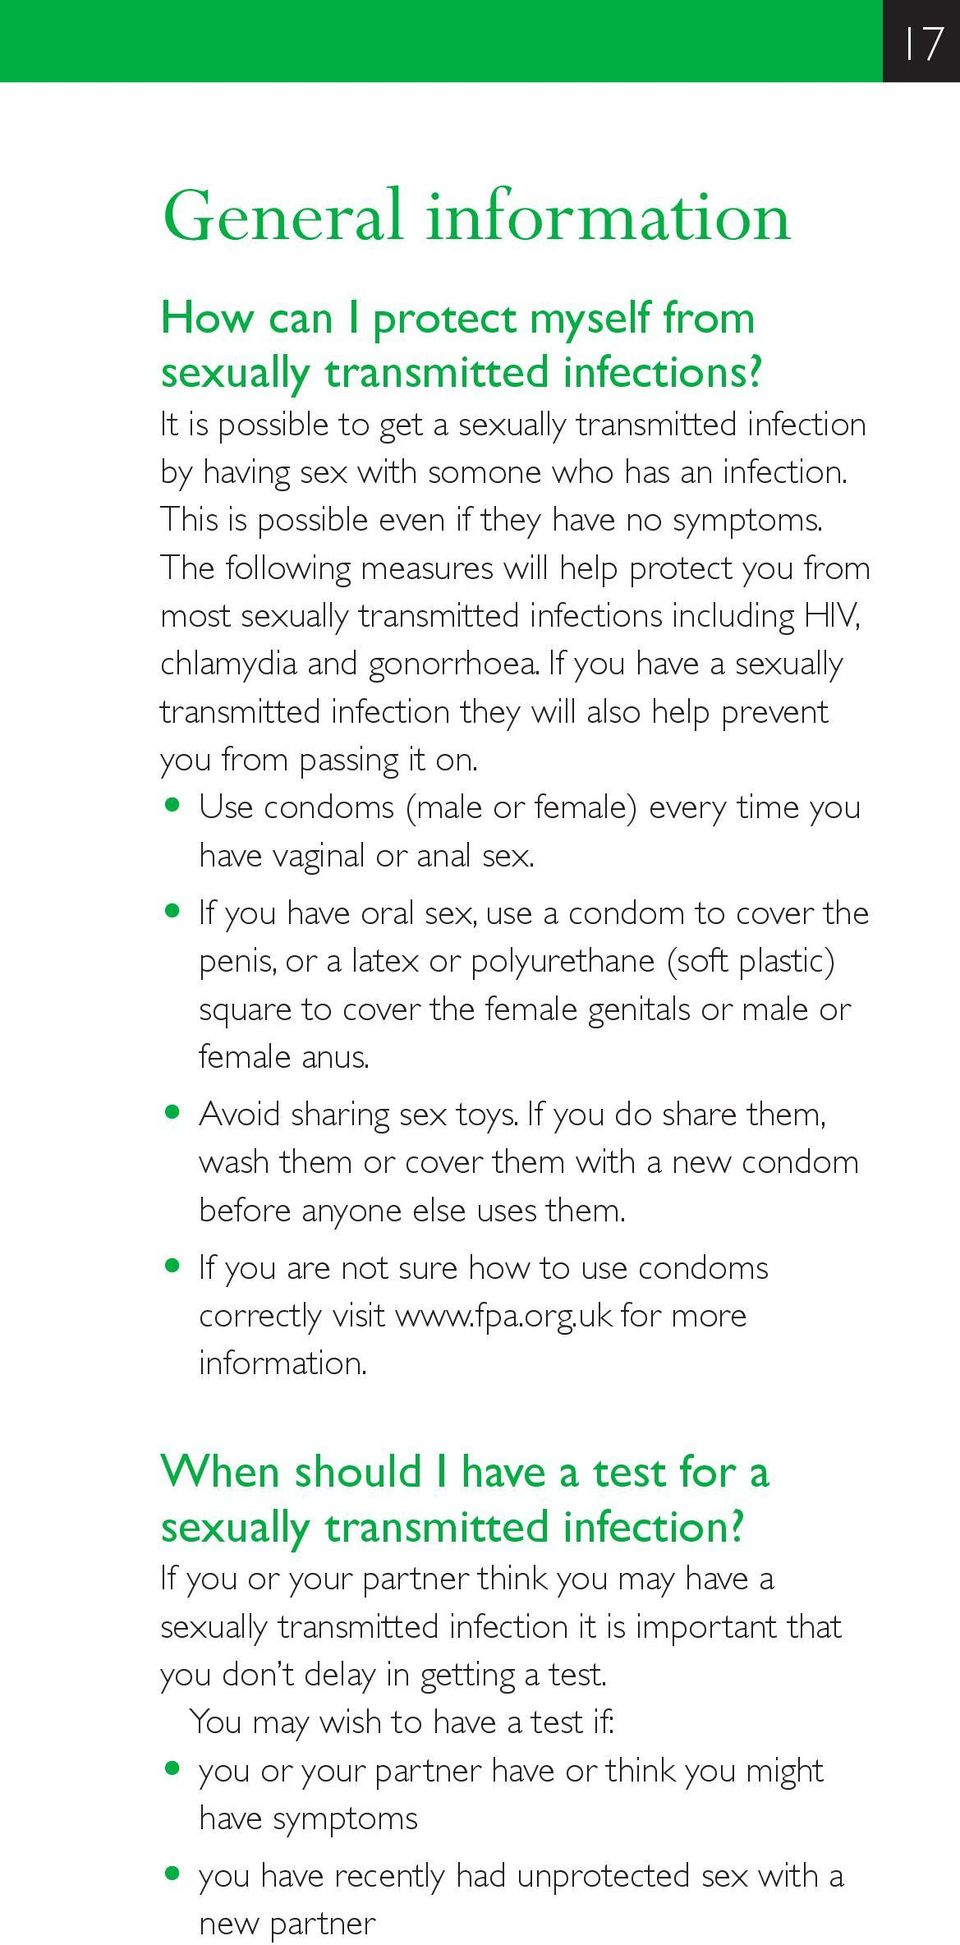 If you have a sexually transmitted infection they will also help prevent you from passing it on. O Use condoms (male or female) every time you have vaginal or anal sex.